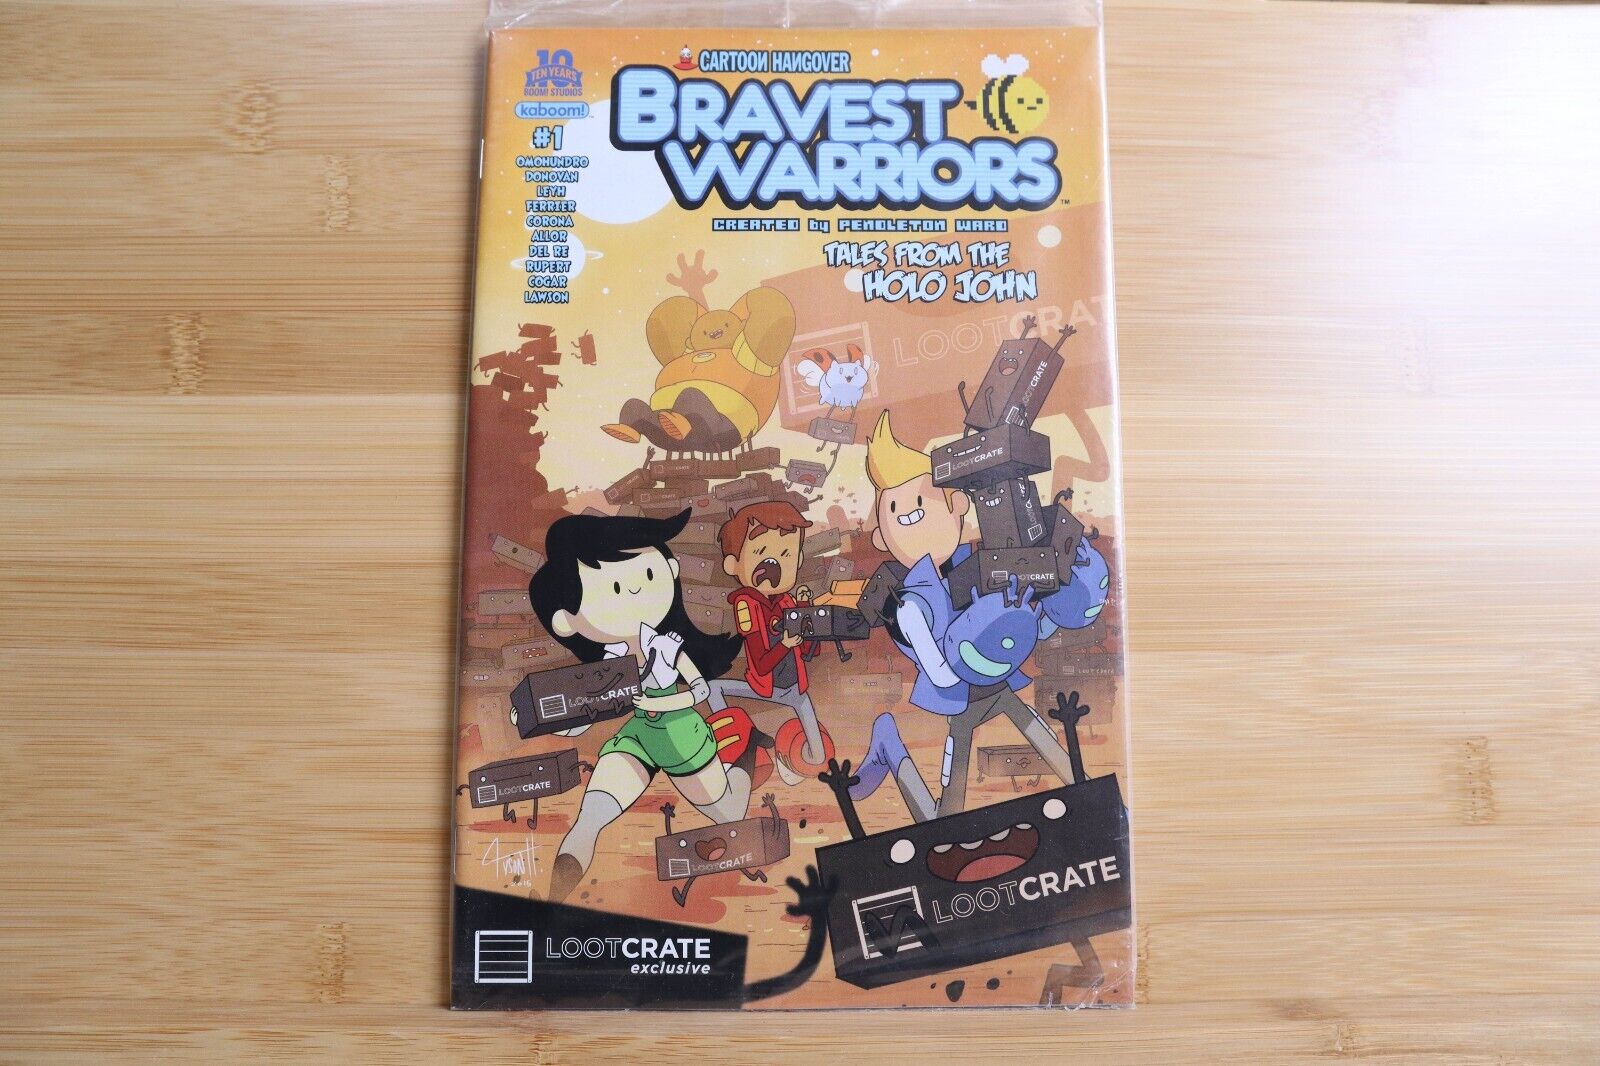 Bravest Warriors: Tales From the Holo John Loot Crate #1 Boom Studio VF/NM 2015